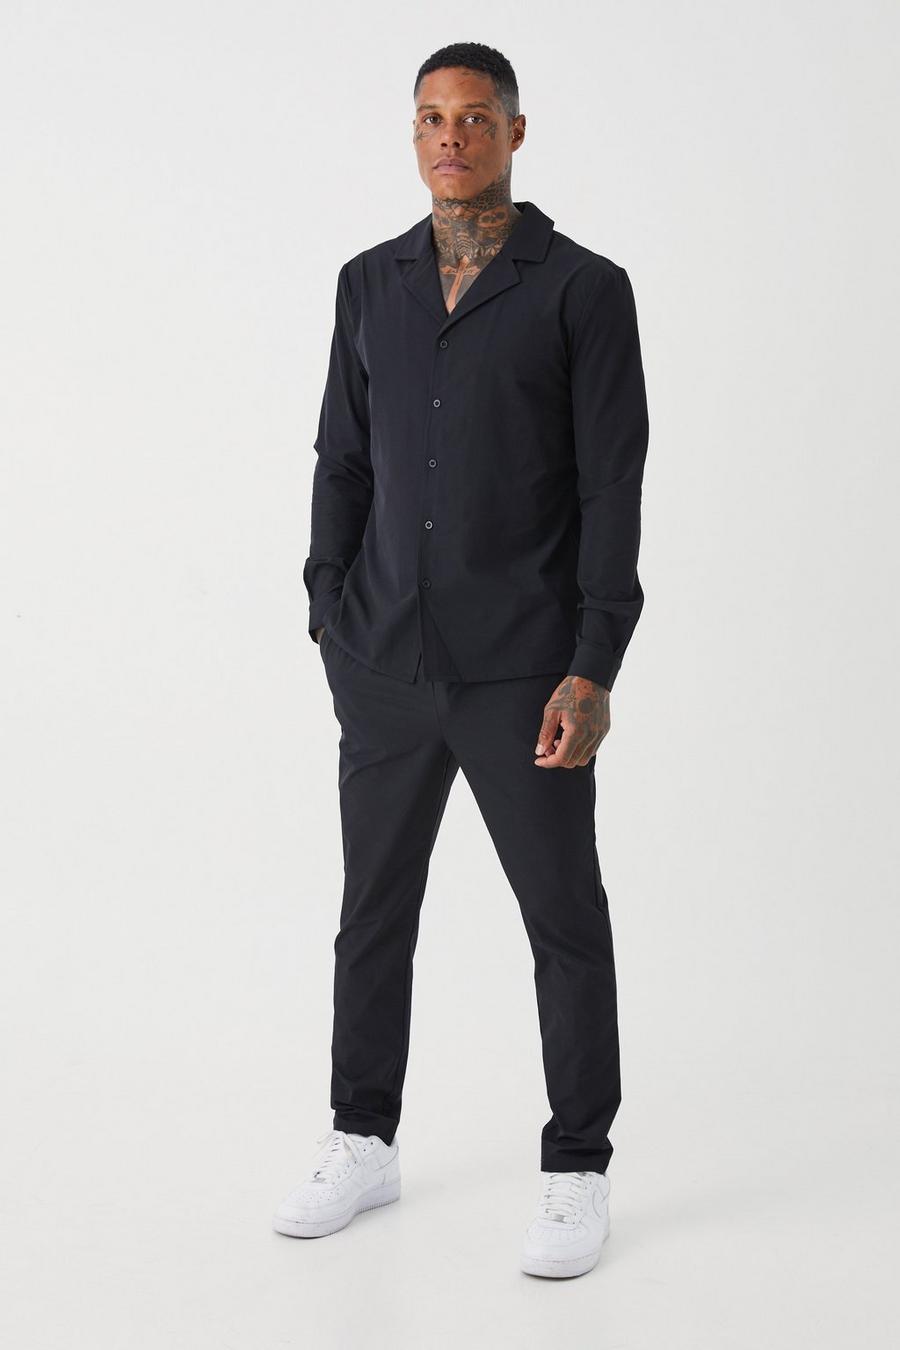 Black Technical Stretch Long Sleeve Shirt & Trouser image number 1